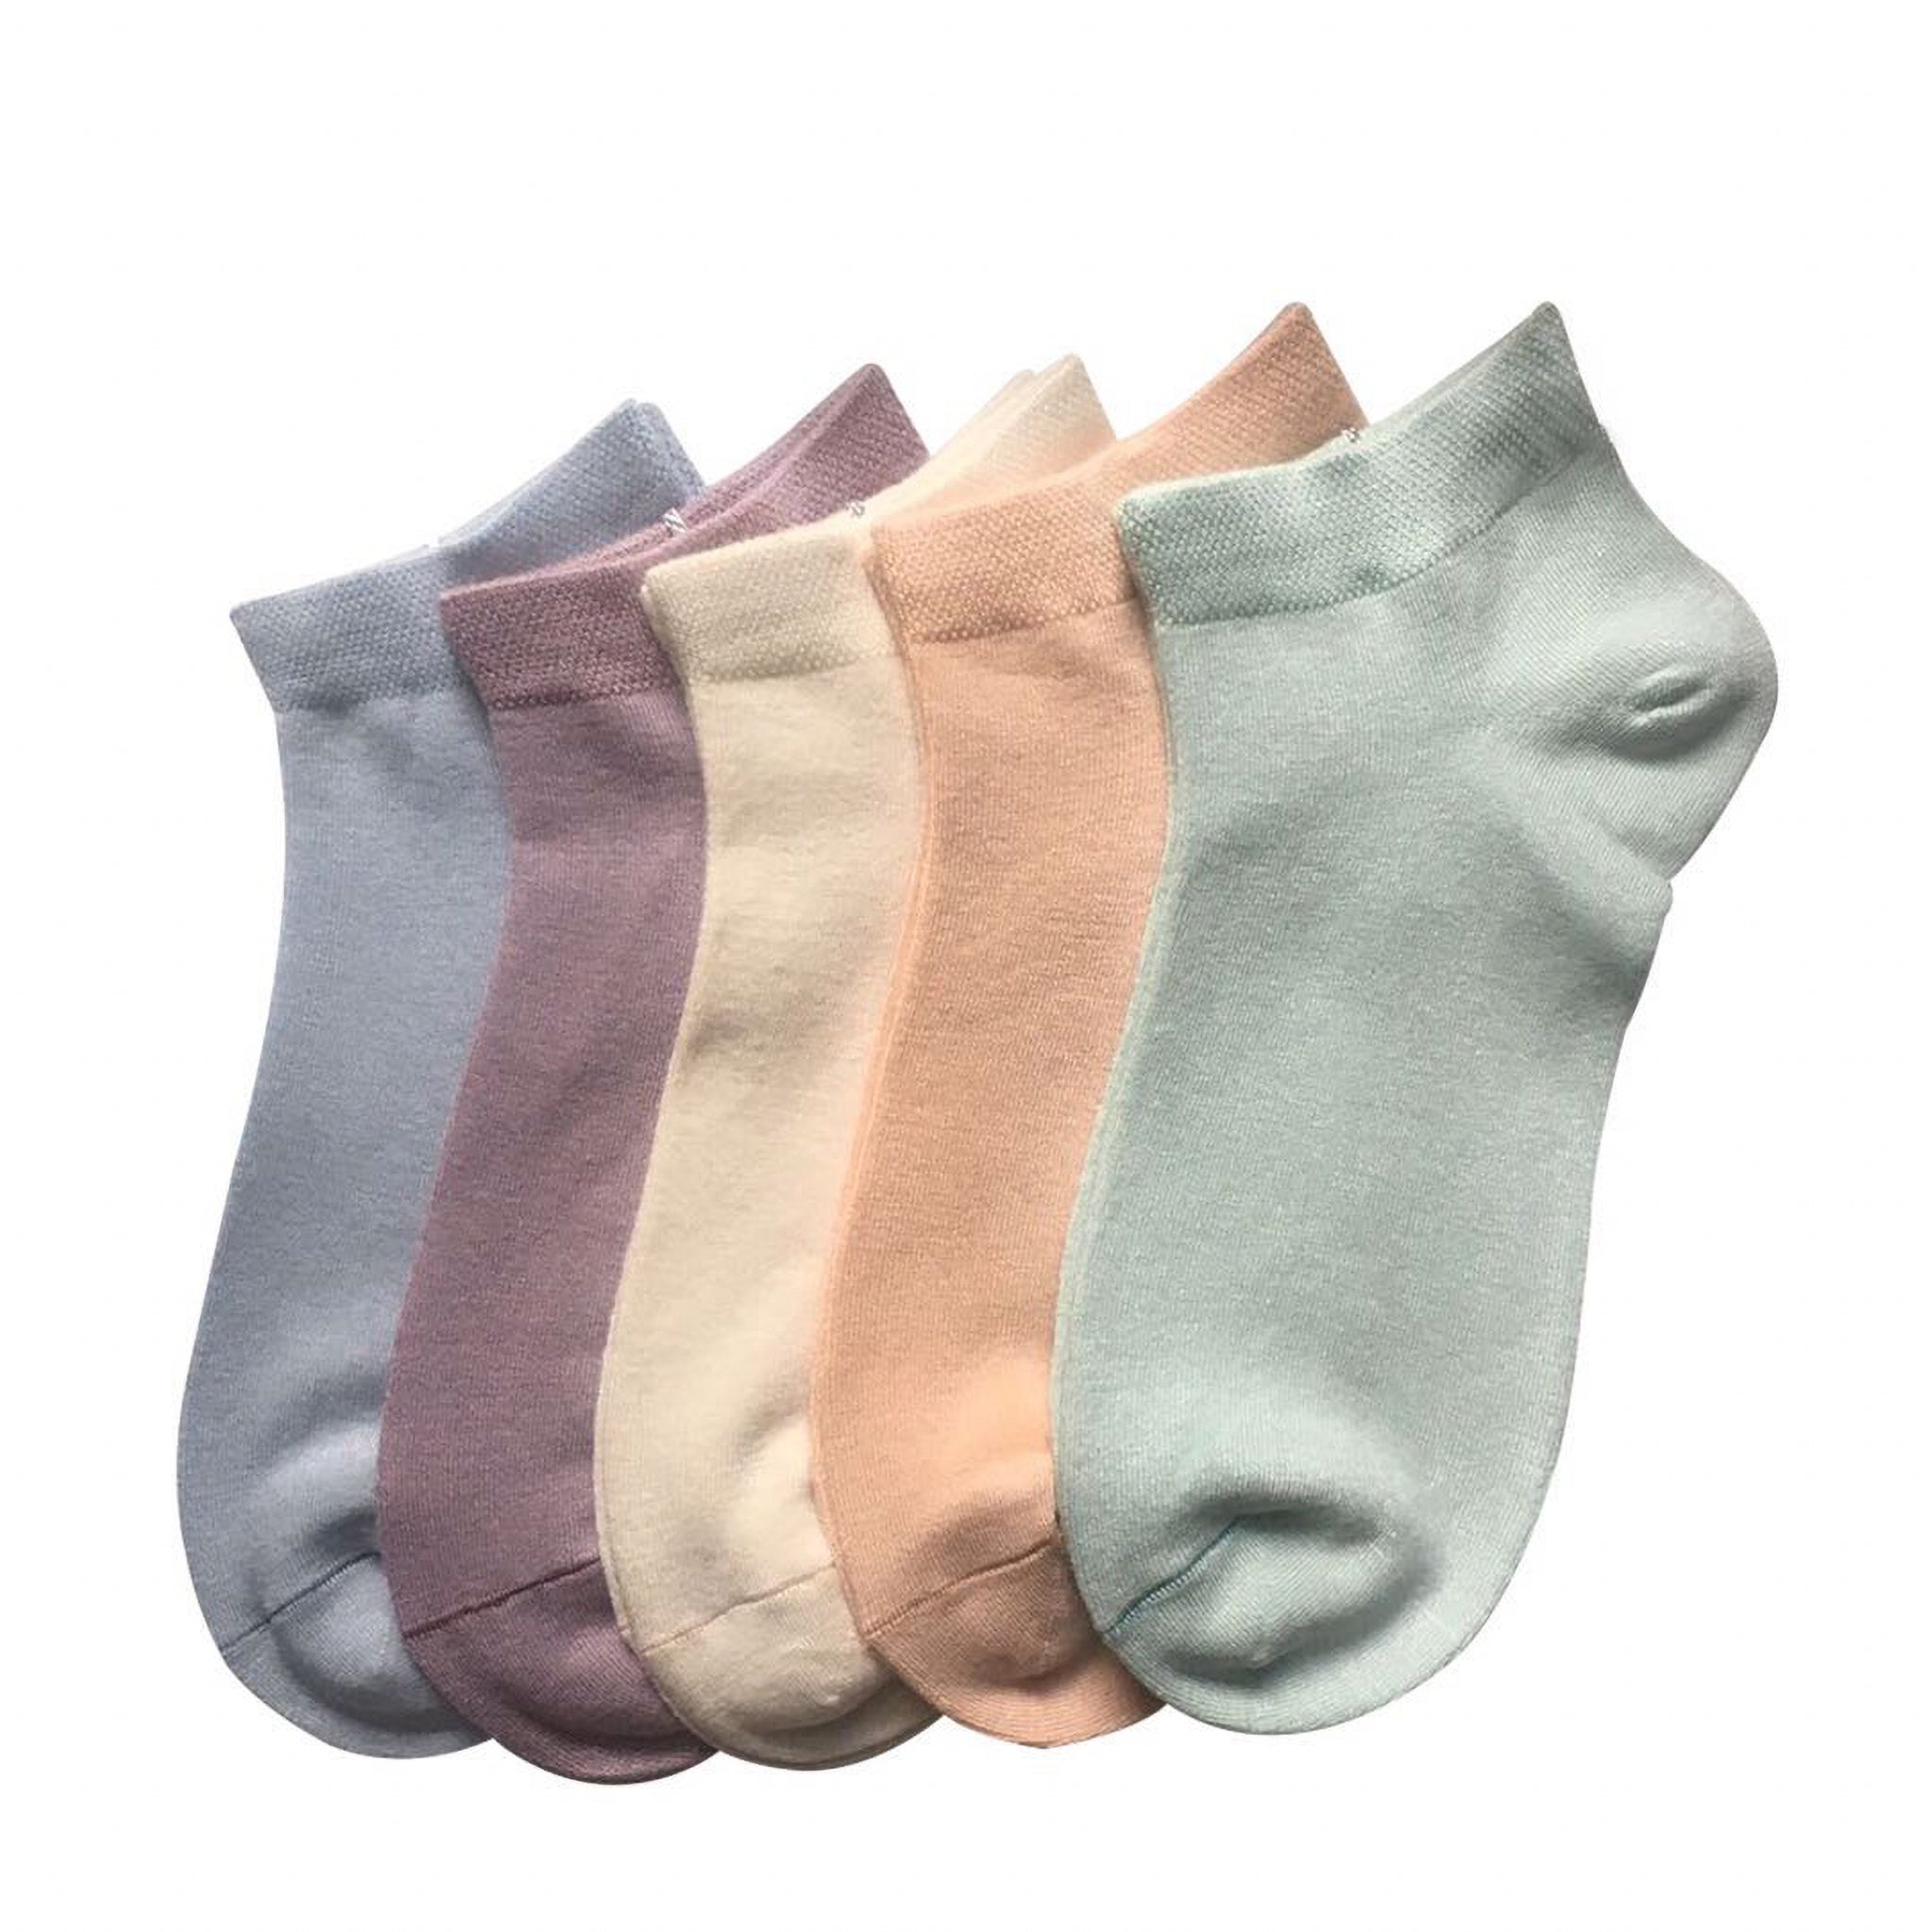 1 Pair Cotton Socks Hollow Out Solid Color Fashion Summer Mesh Thin Breathable  Tube Loose Long Women Cute Soft Socks Spring